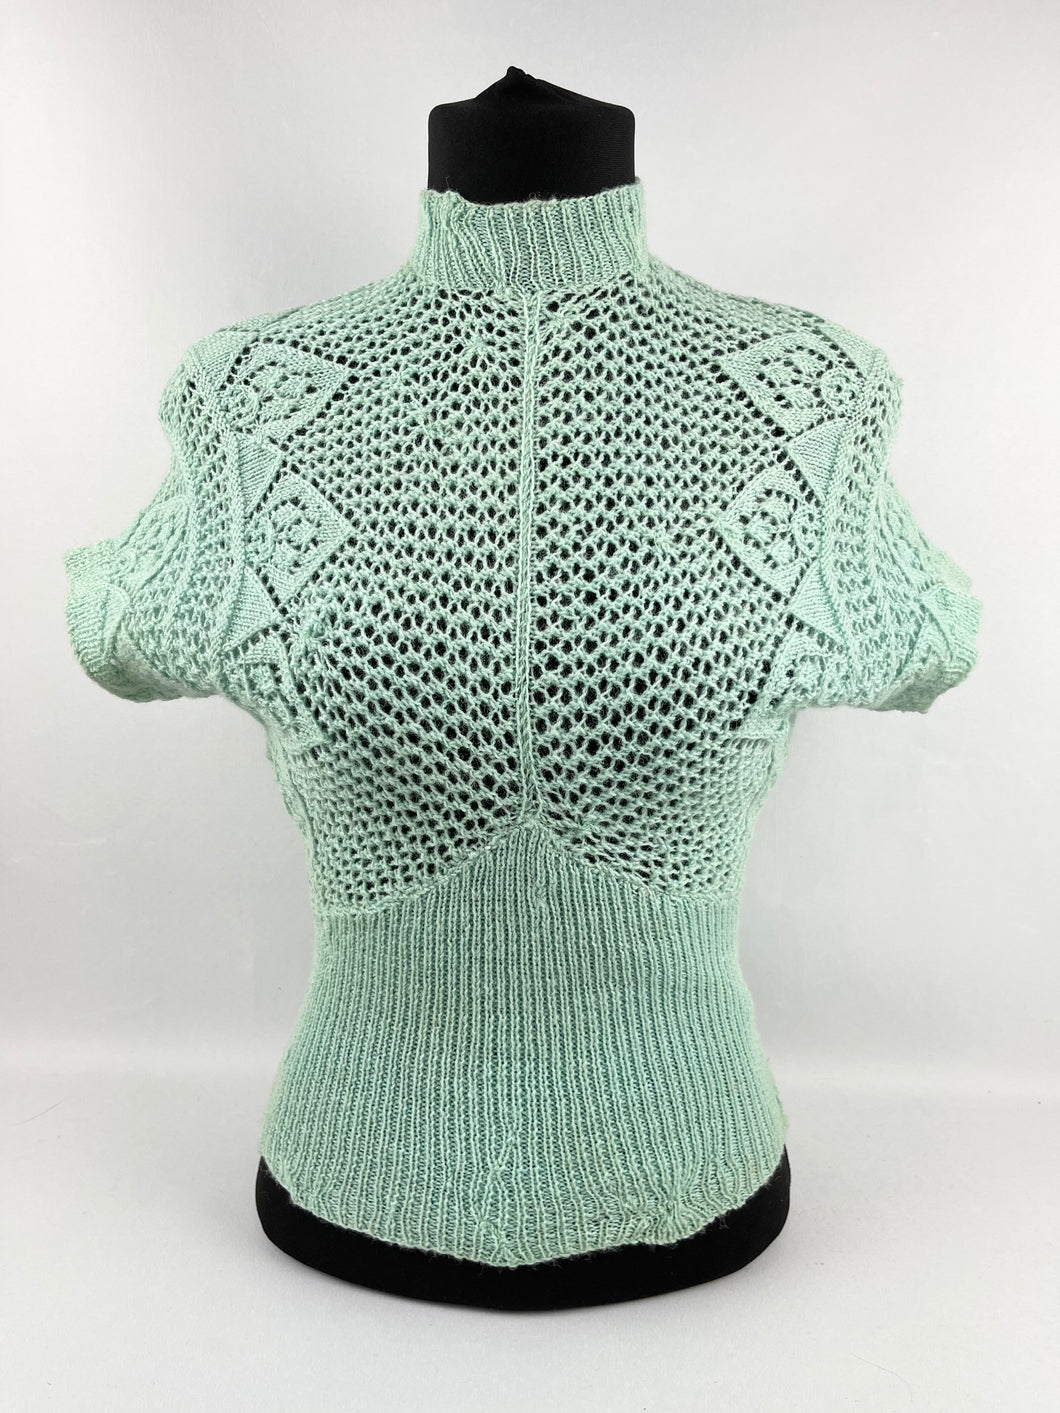 Original 1950s Jumper in Light Reseda Green - Charming Lace Knit - AS IS - Bust 34